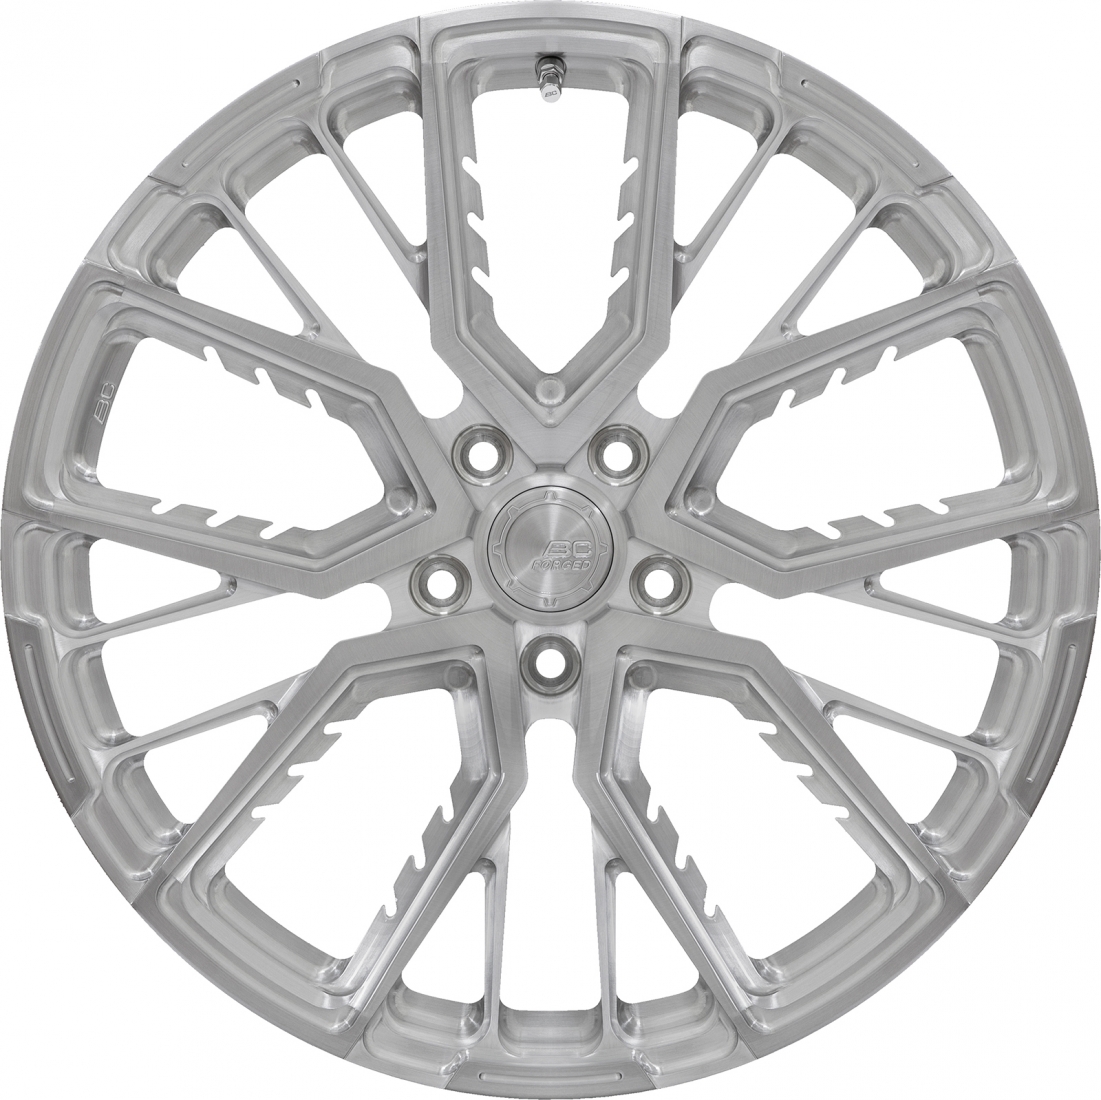 2020-23 BC Forged EH352 Wheels for C8 Corvette, Set of 4